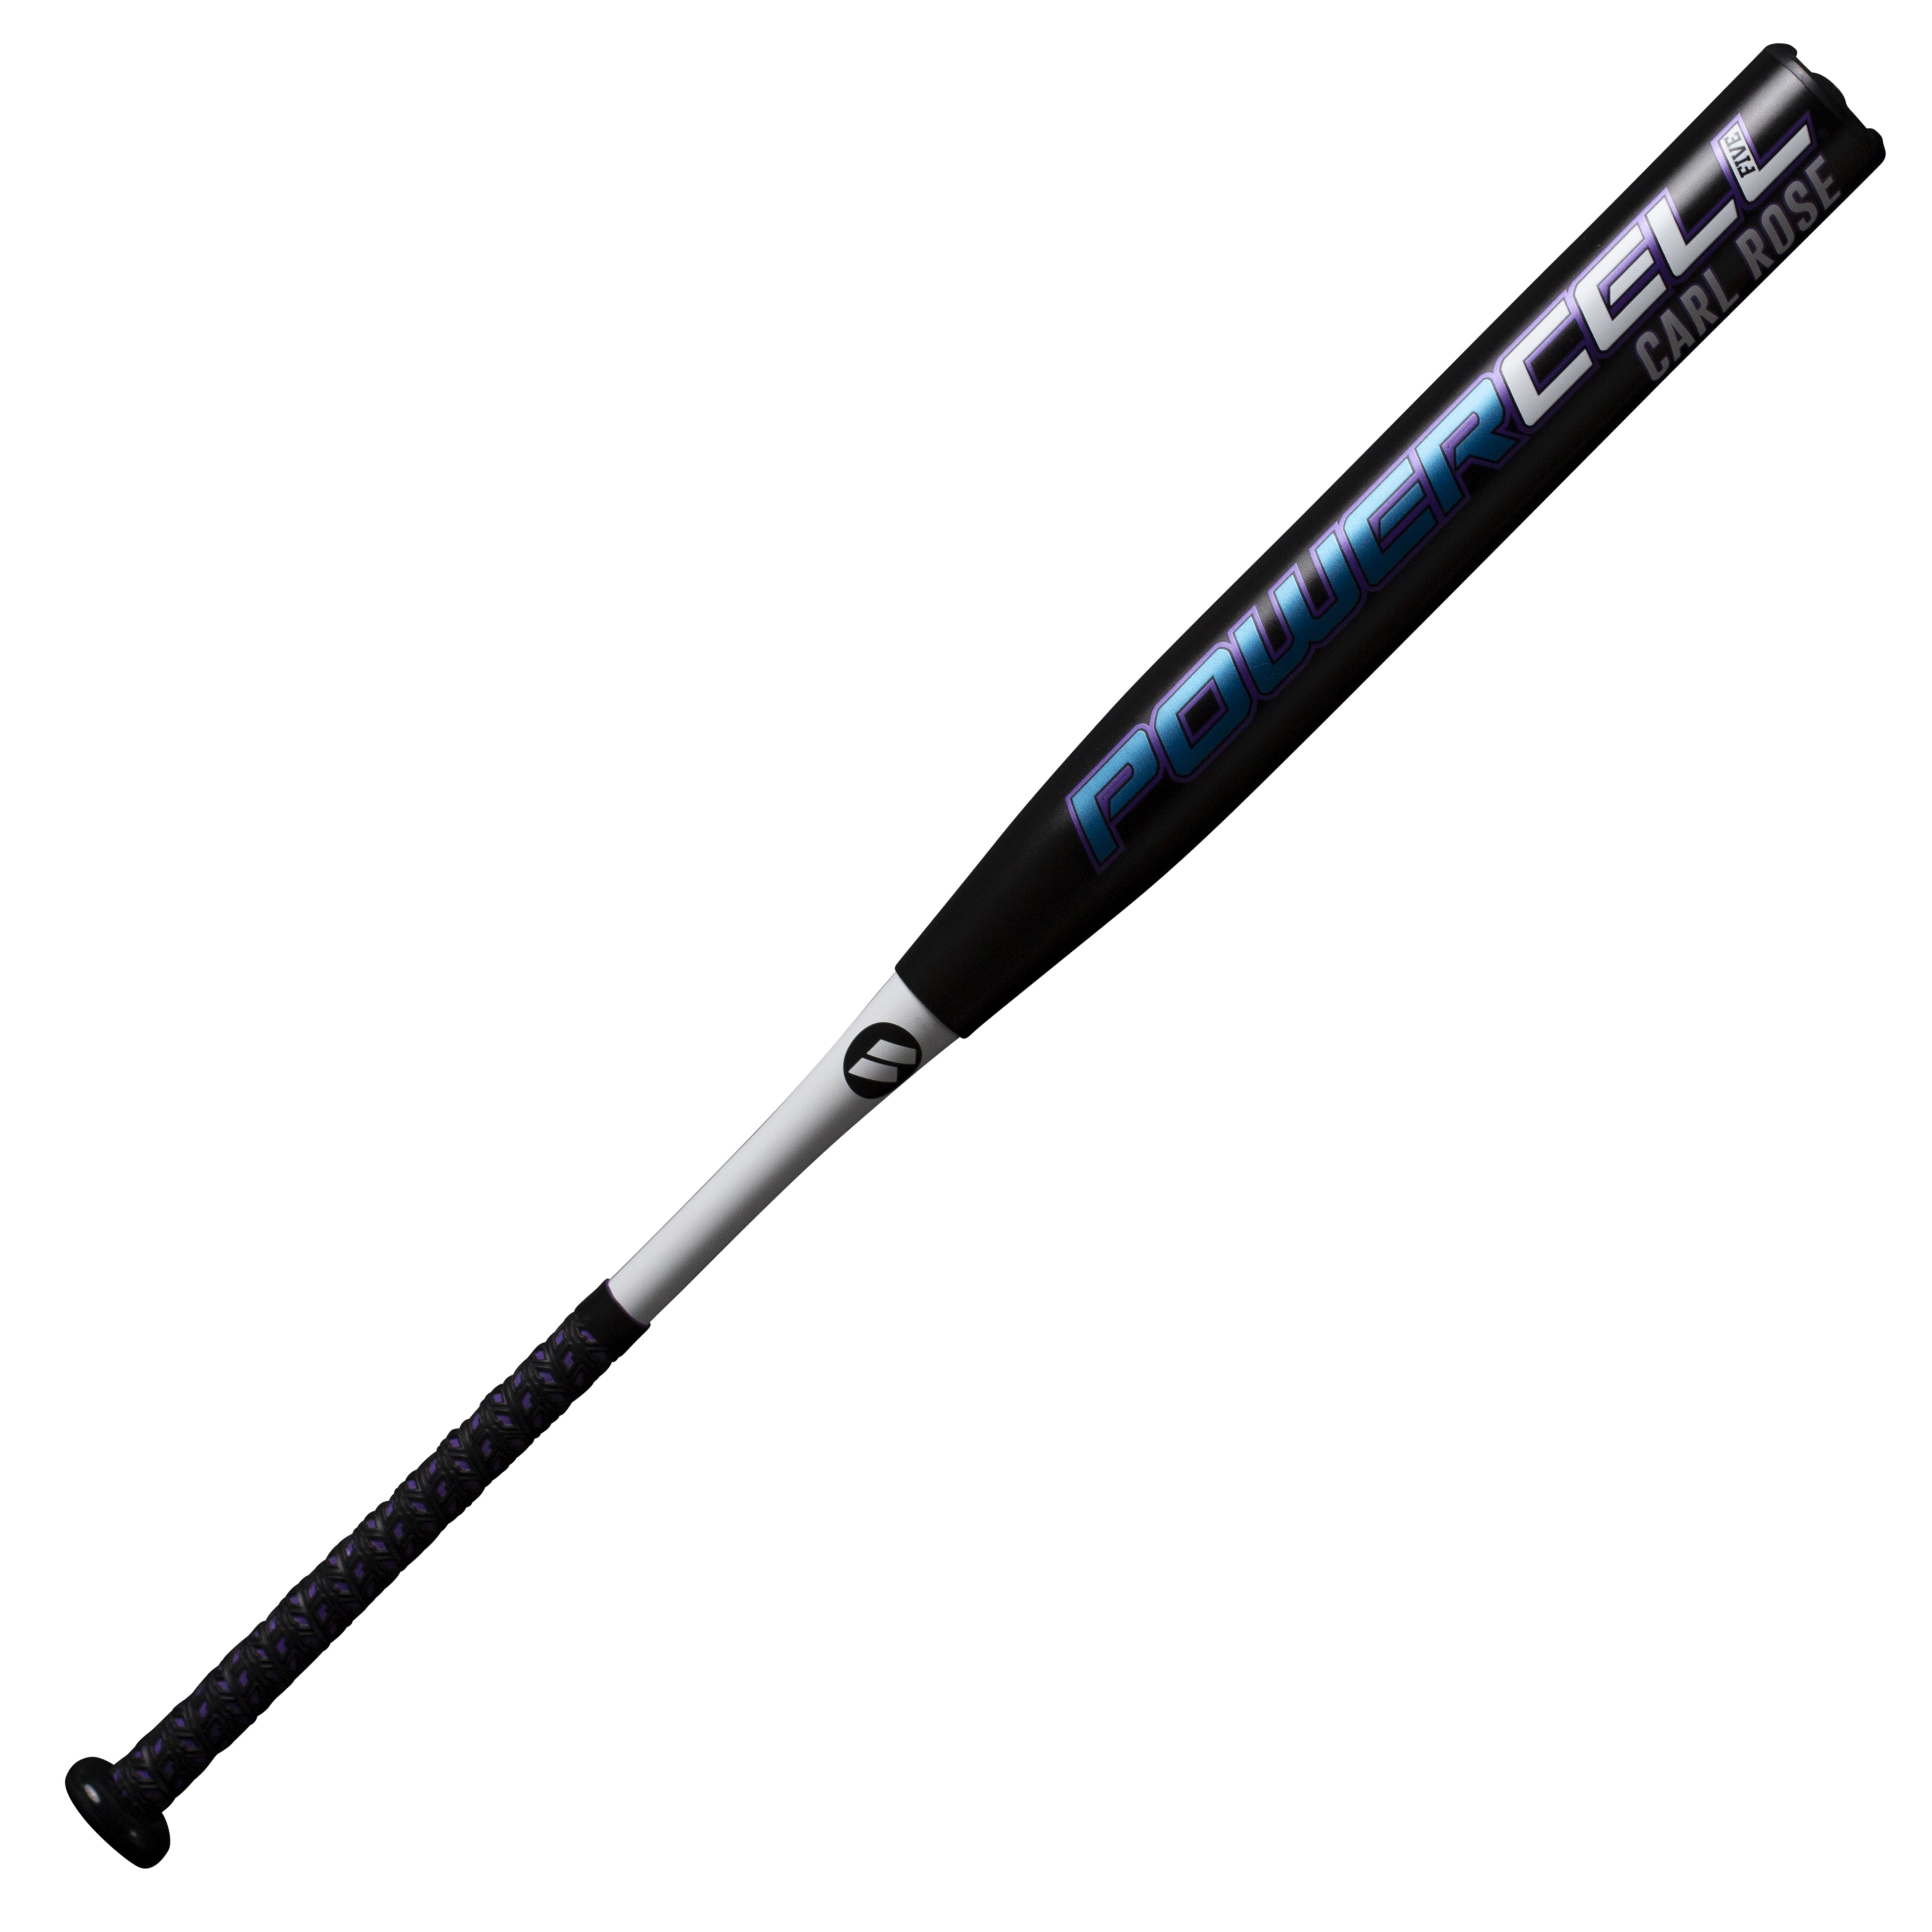 worth-carl-rose-powercell-slowpitch-softball-bat-13-5-usssa-34-inch-27-oz WCARLU-3-27 Worth 043365360938 Worth Softball Bat honoring Carl Rose. The 2021 Worth Slow pitch